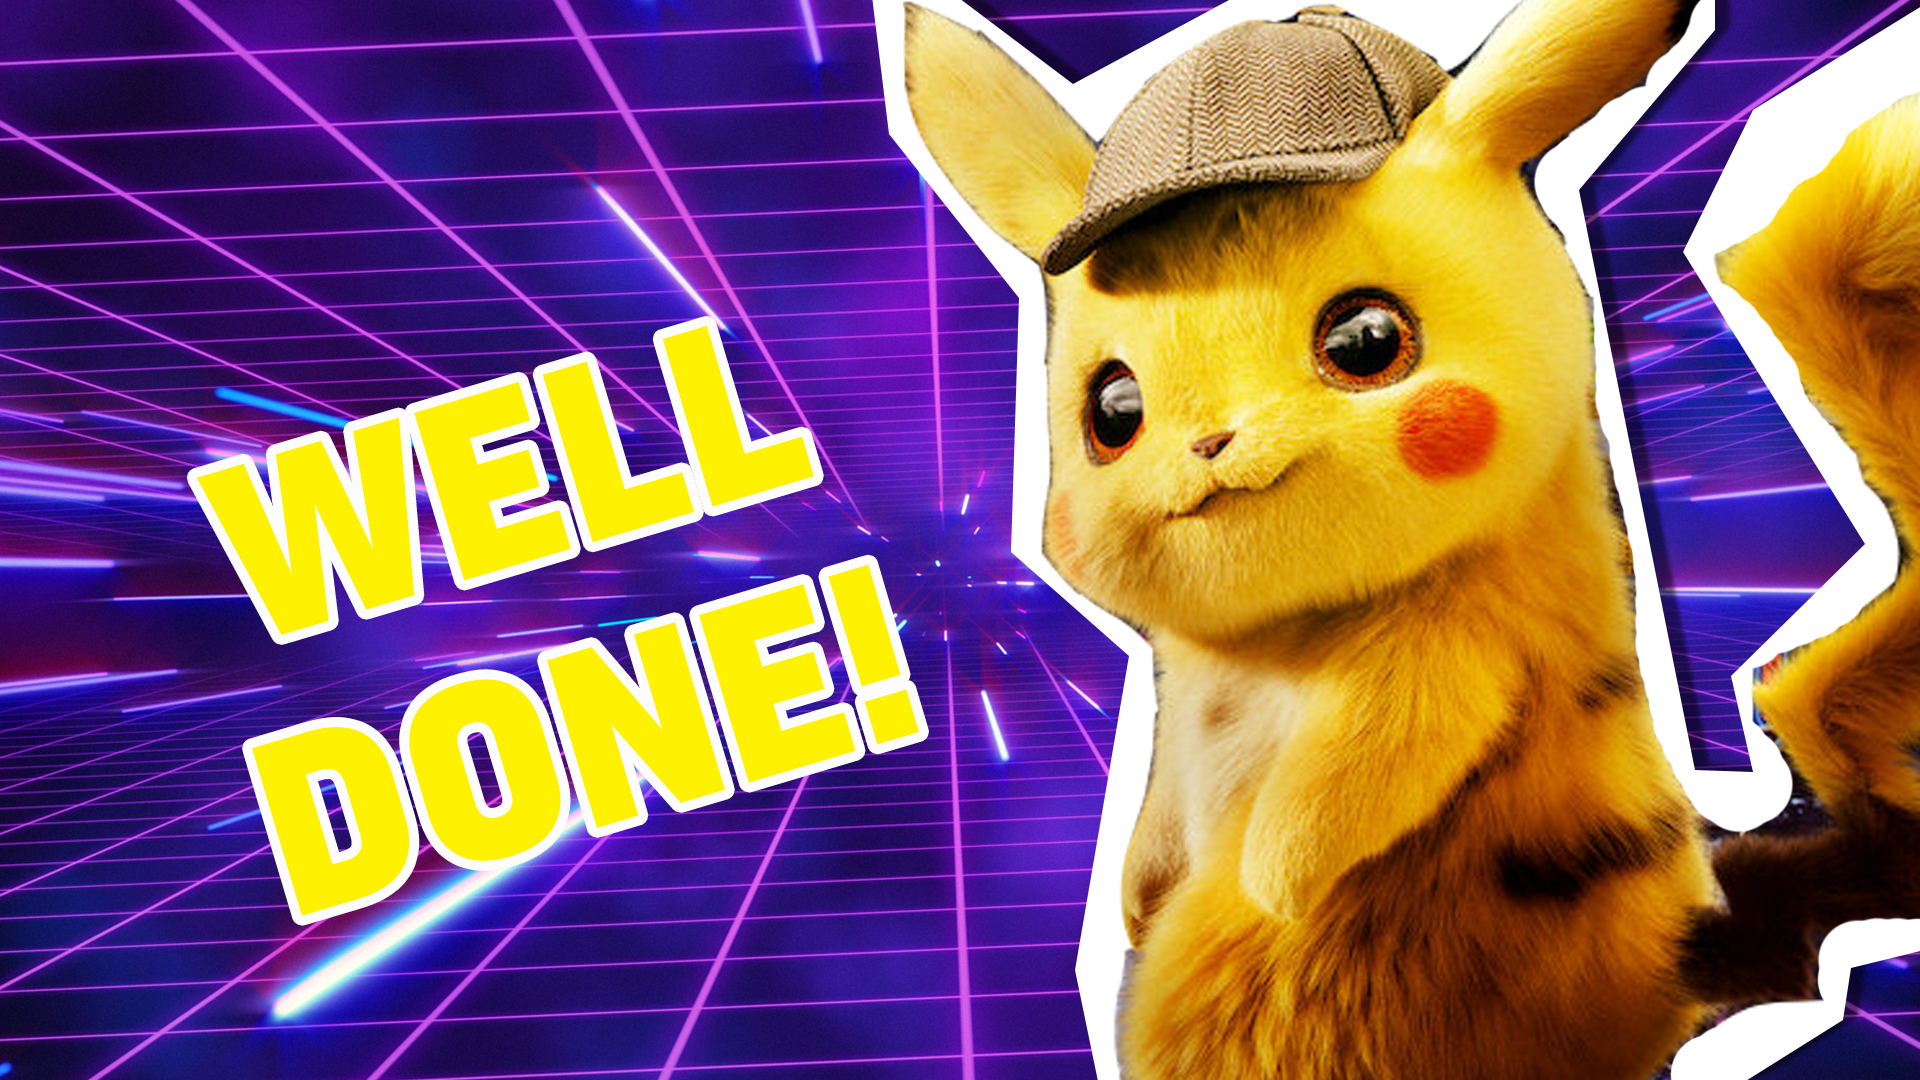 Great work! We can tell you love all things Detective Pikachu! But can you get 100% next time? We believe in you!